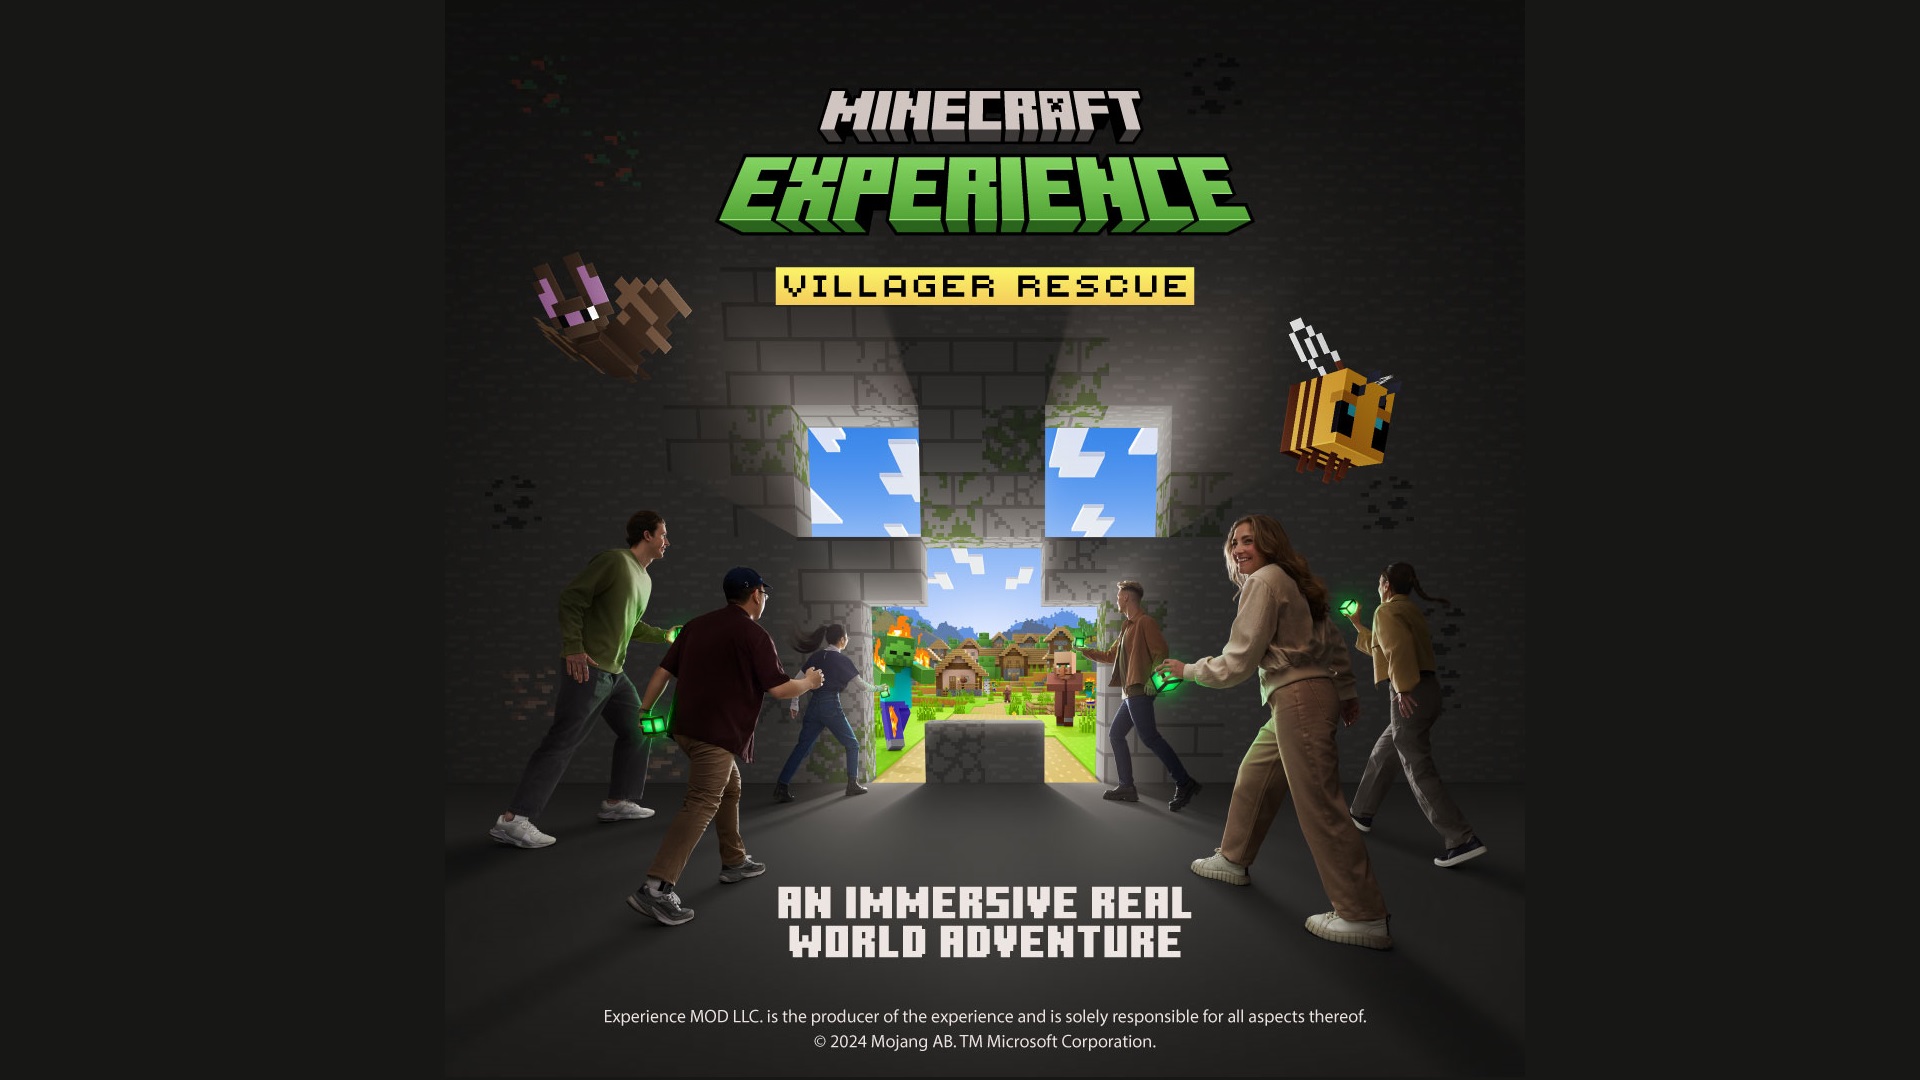 Minecraft Experience: Villager Rescue is an interactive adventure for families